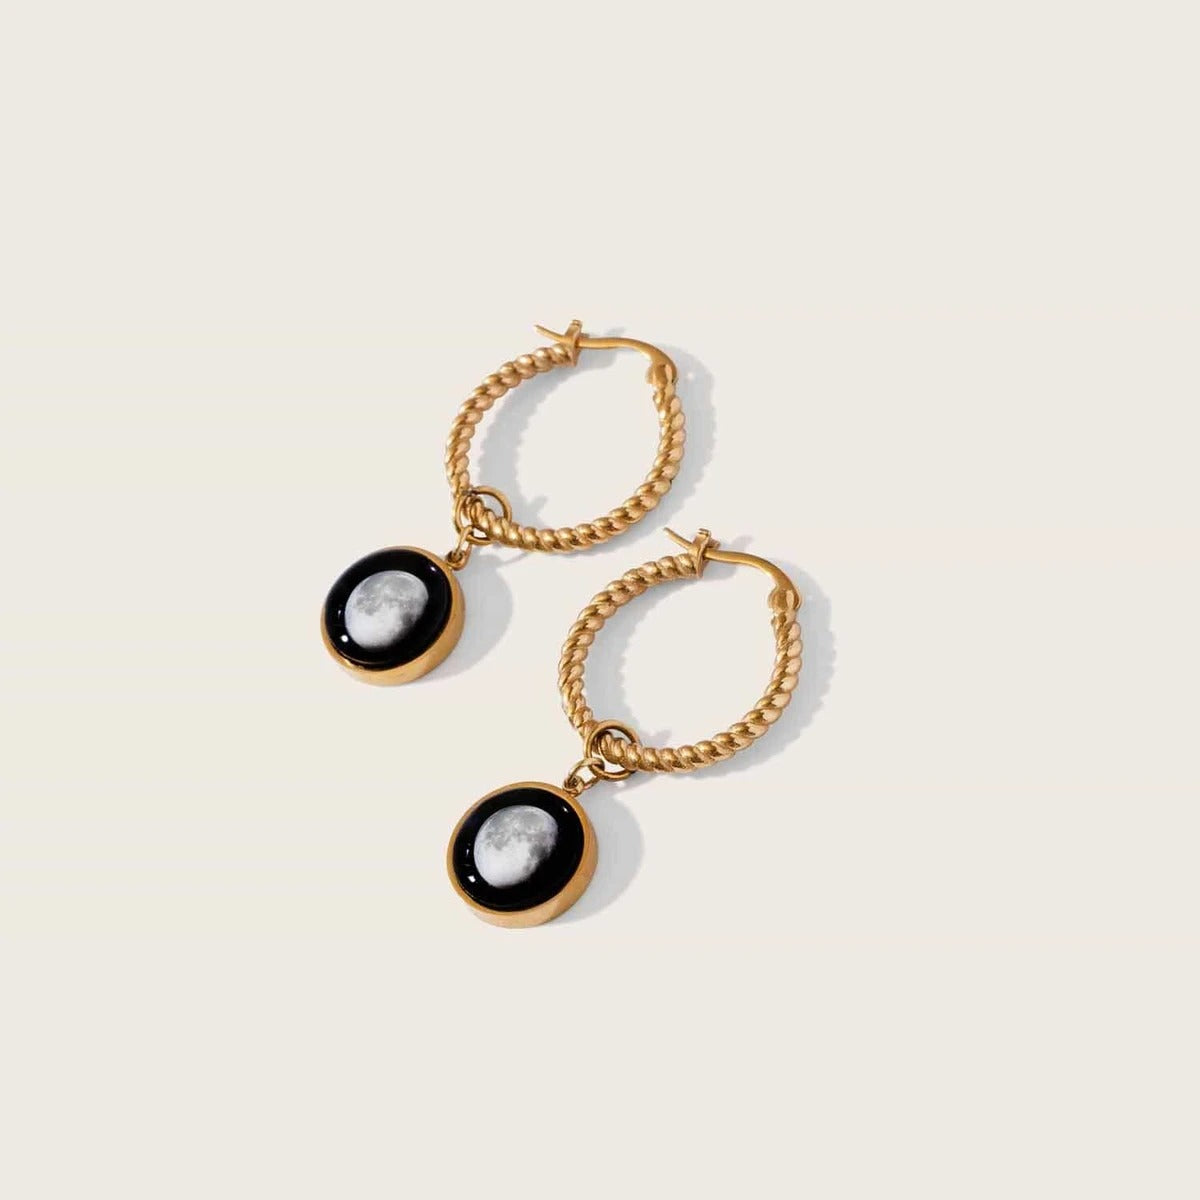 The Carina Hoops in Gold